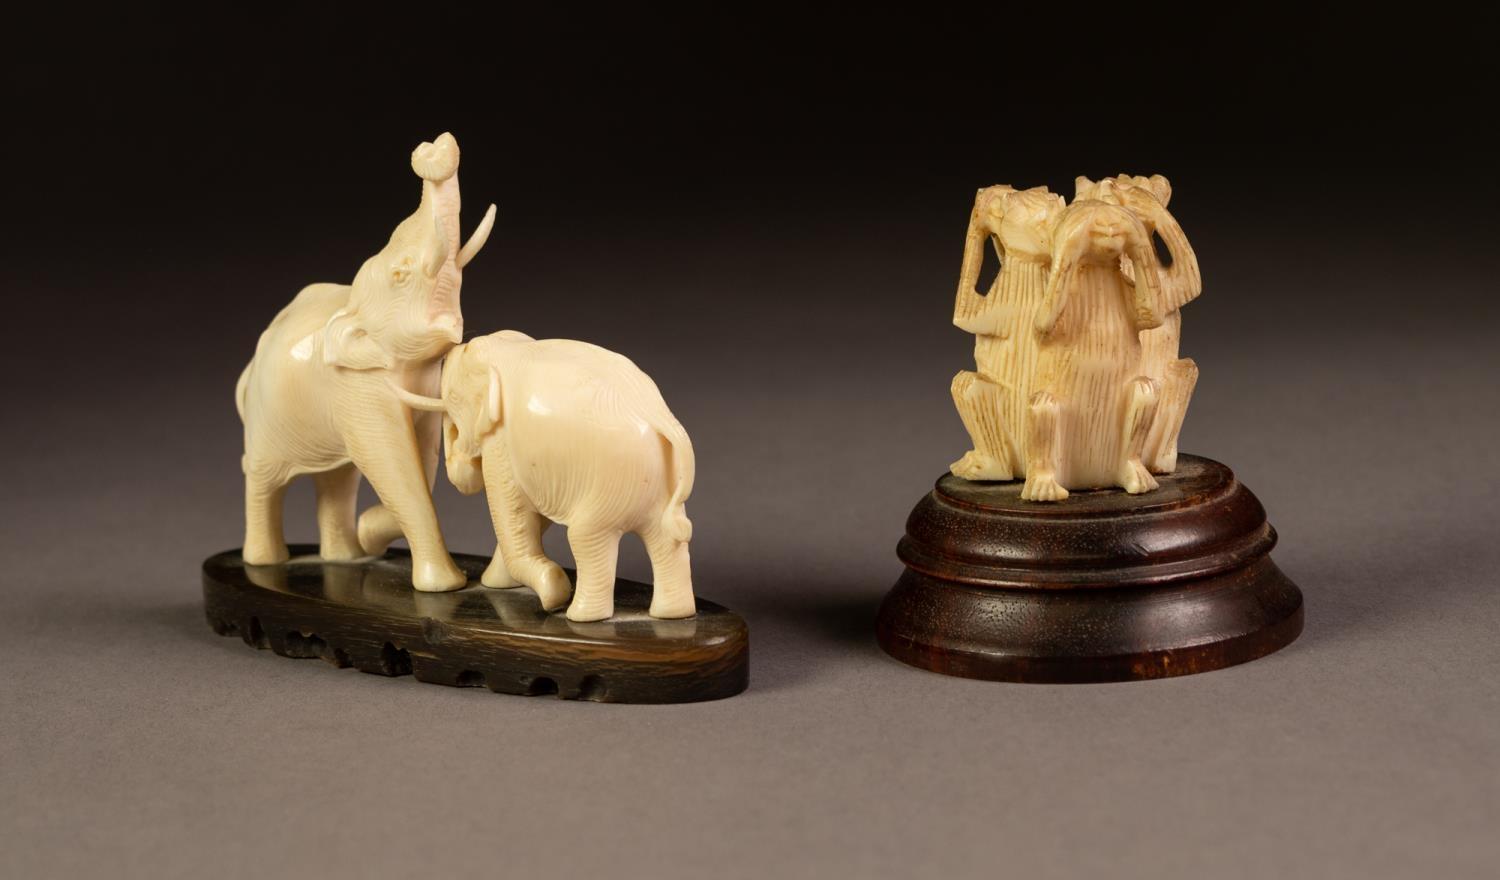 A SMALL CARVED IVORY MODEL OF TWO ELEPHANTS FIGHTING, on an elliptical horn base, 3 3/4" (9.5cm) - Image 3 of 3